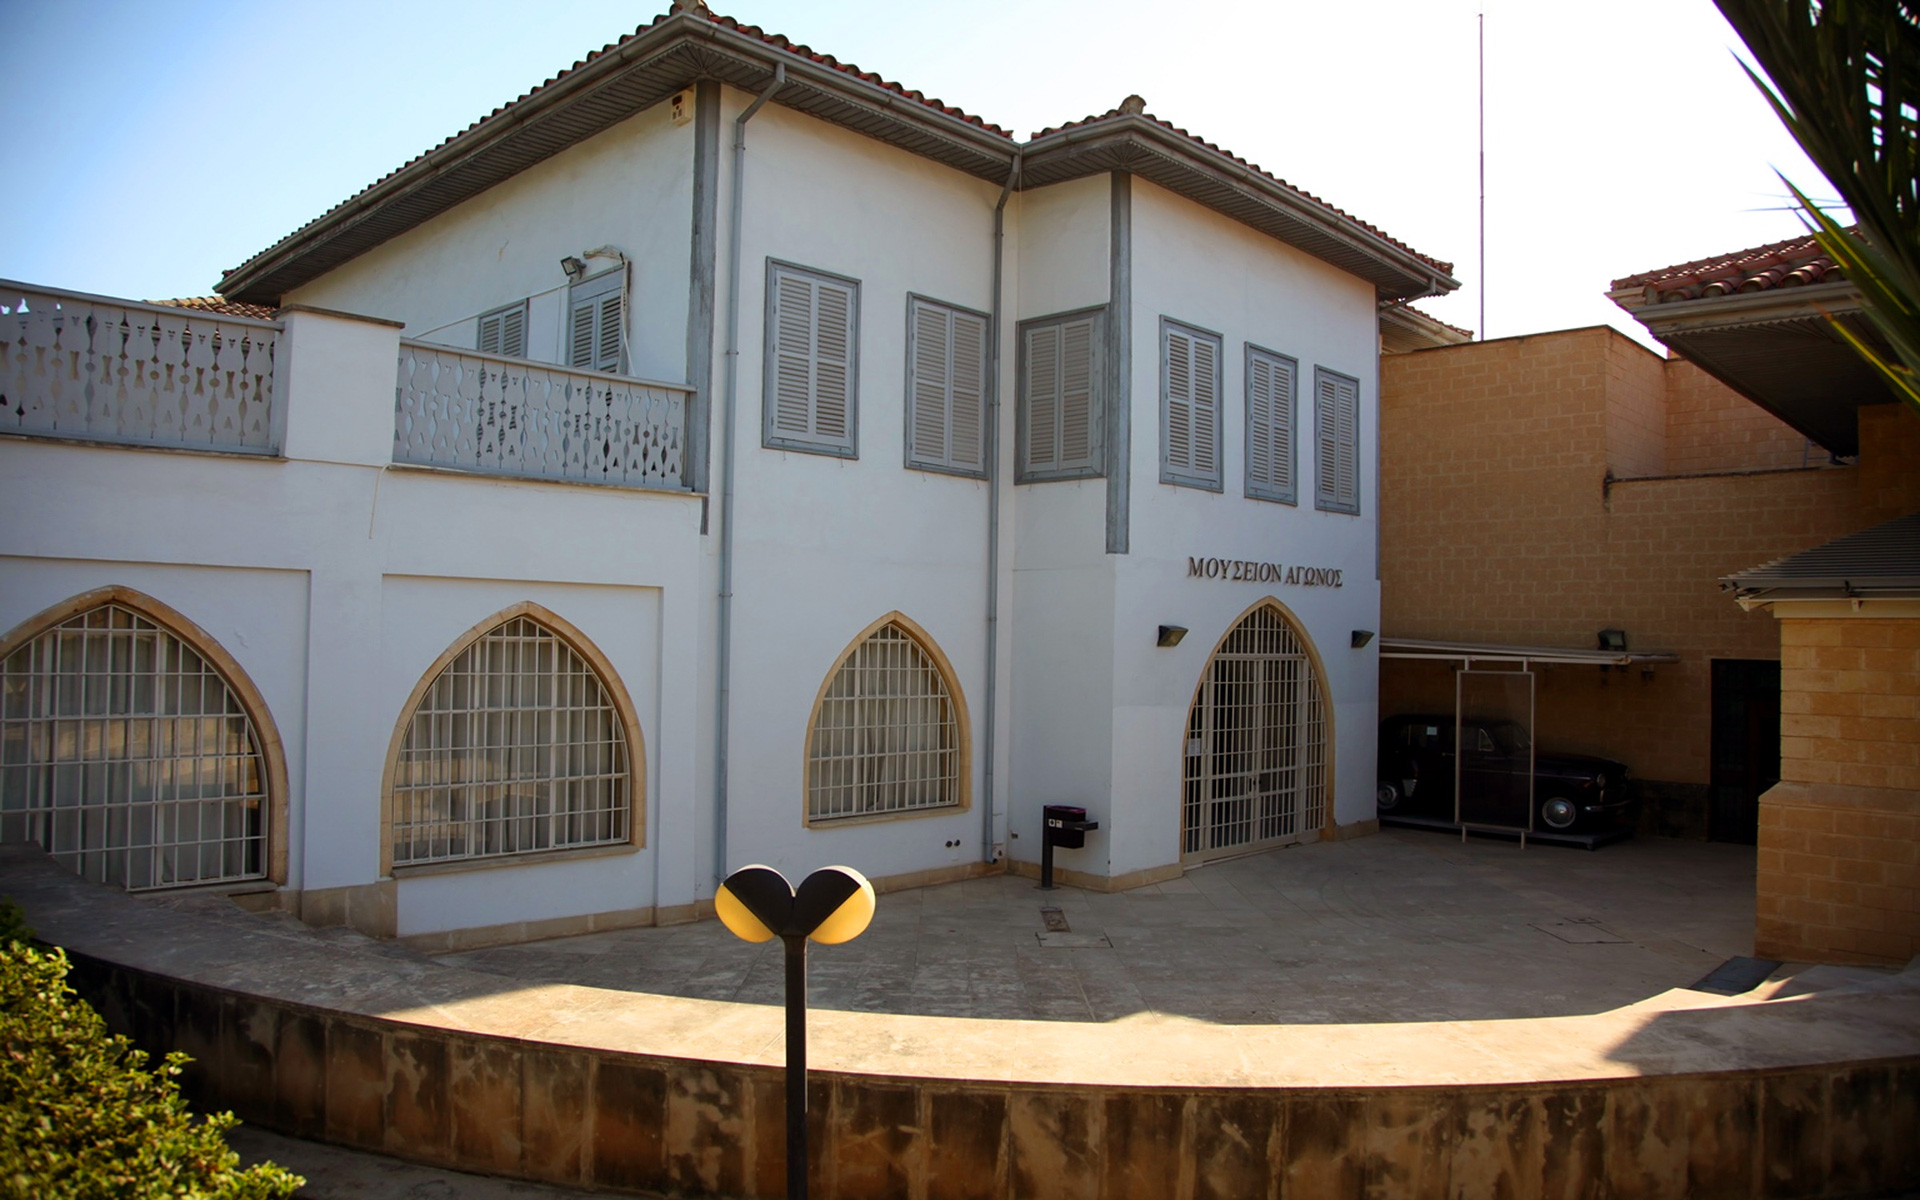 The National Struggle Museum in Cyprus